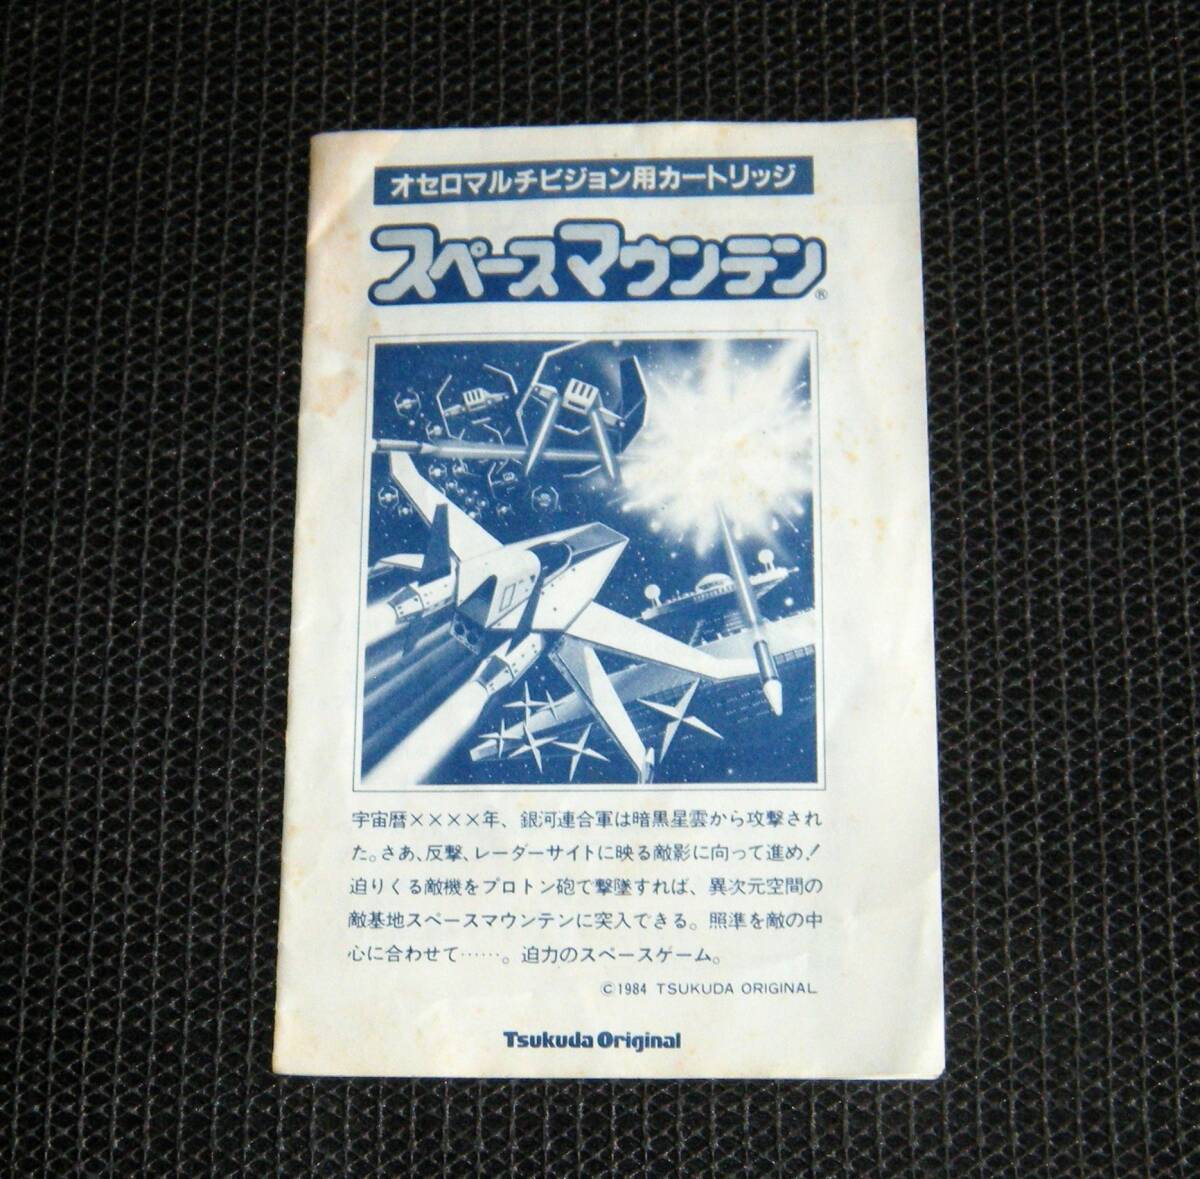  prompt decision SG-1000,SC-3000 instructions only Space mountain Space Mountain Othello multi Vision including in a package possible ( soft less )